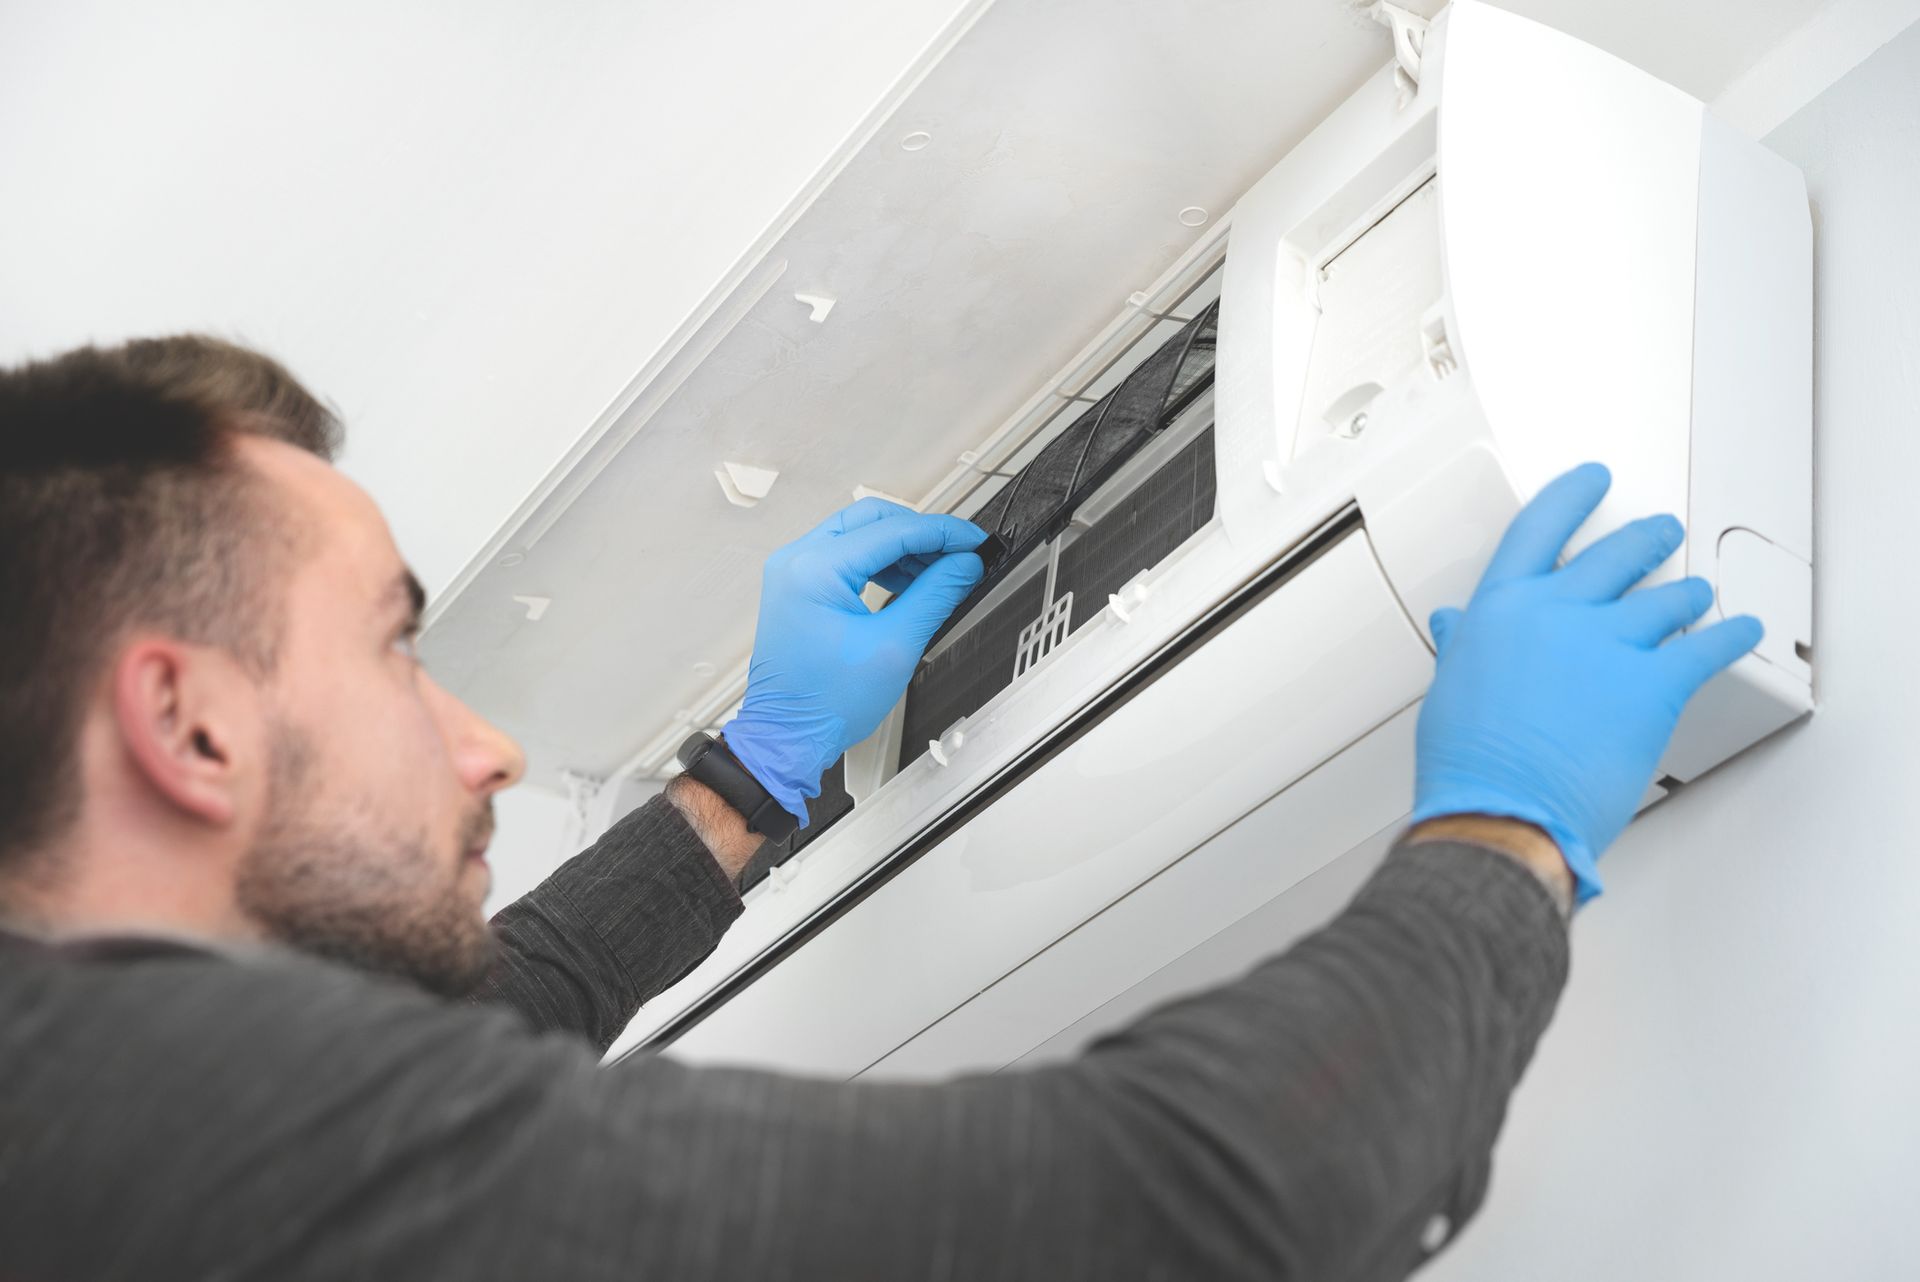 A man wearing blue gloves is cleaning an air conditioner.